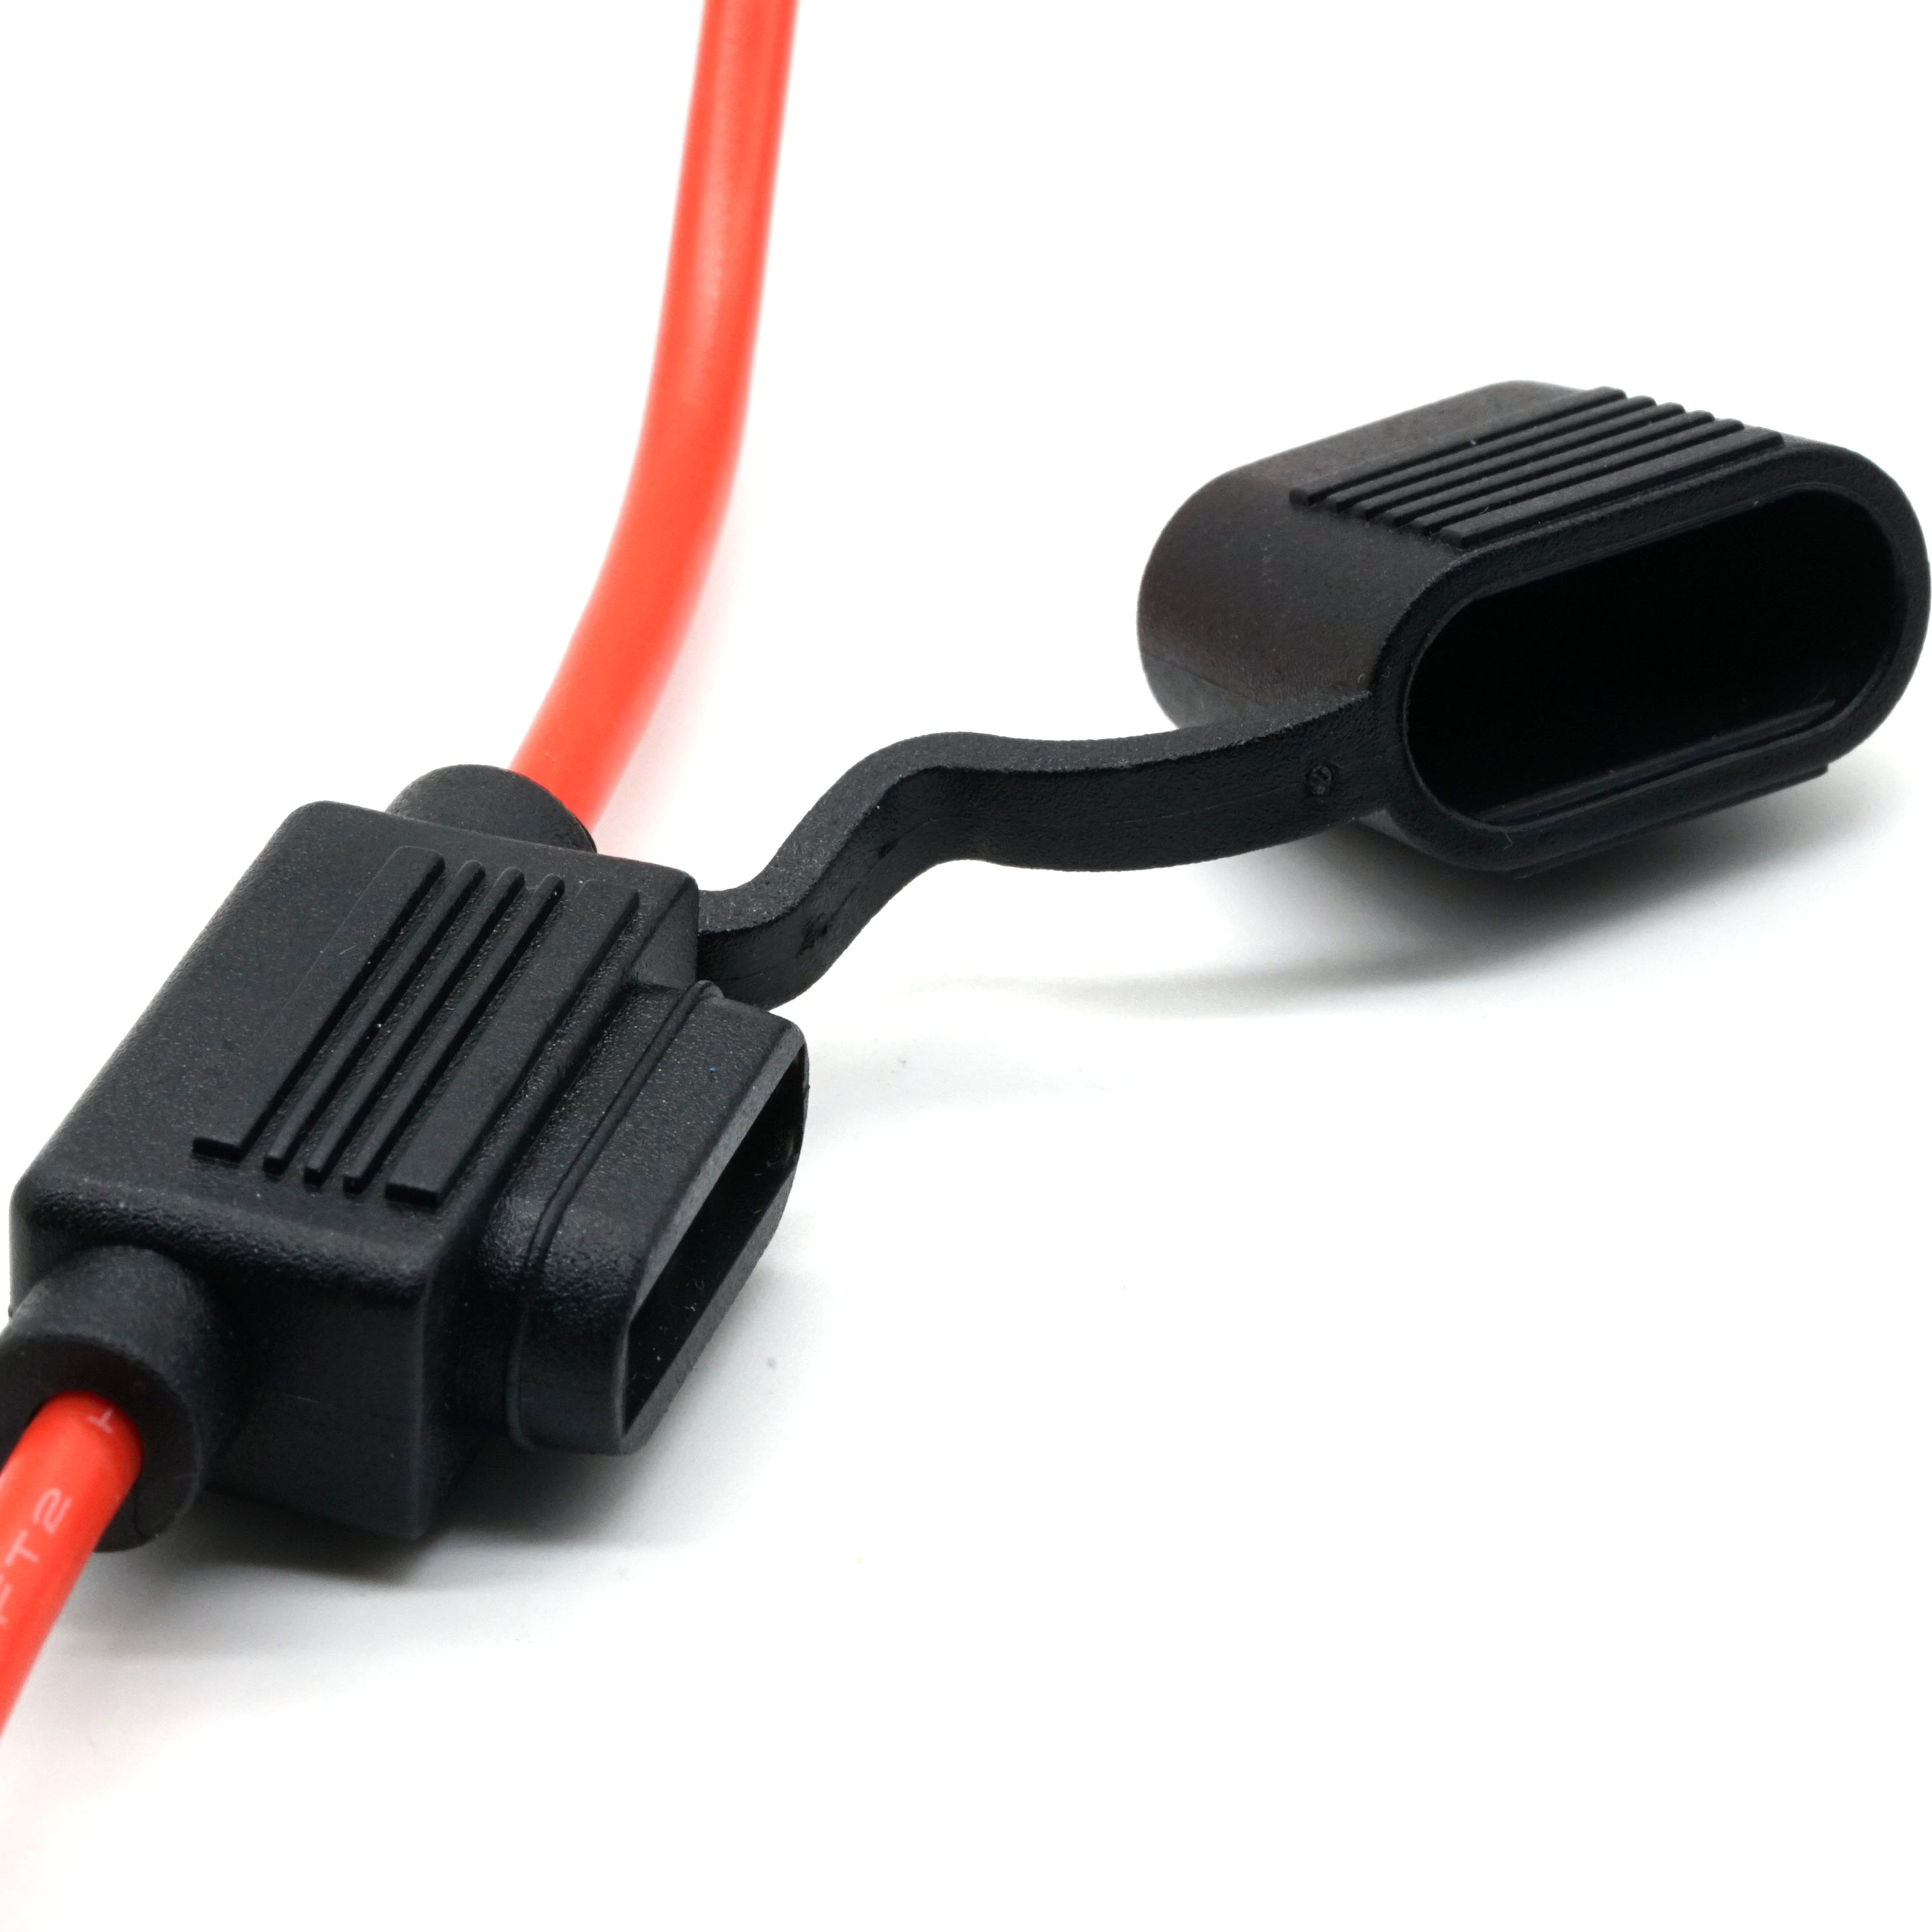 XT60 Plug Cable Harness Silicone Wire With Fuse Holder For RC Lipo Battery customizable